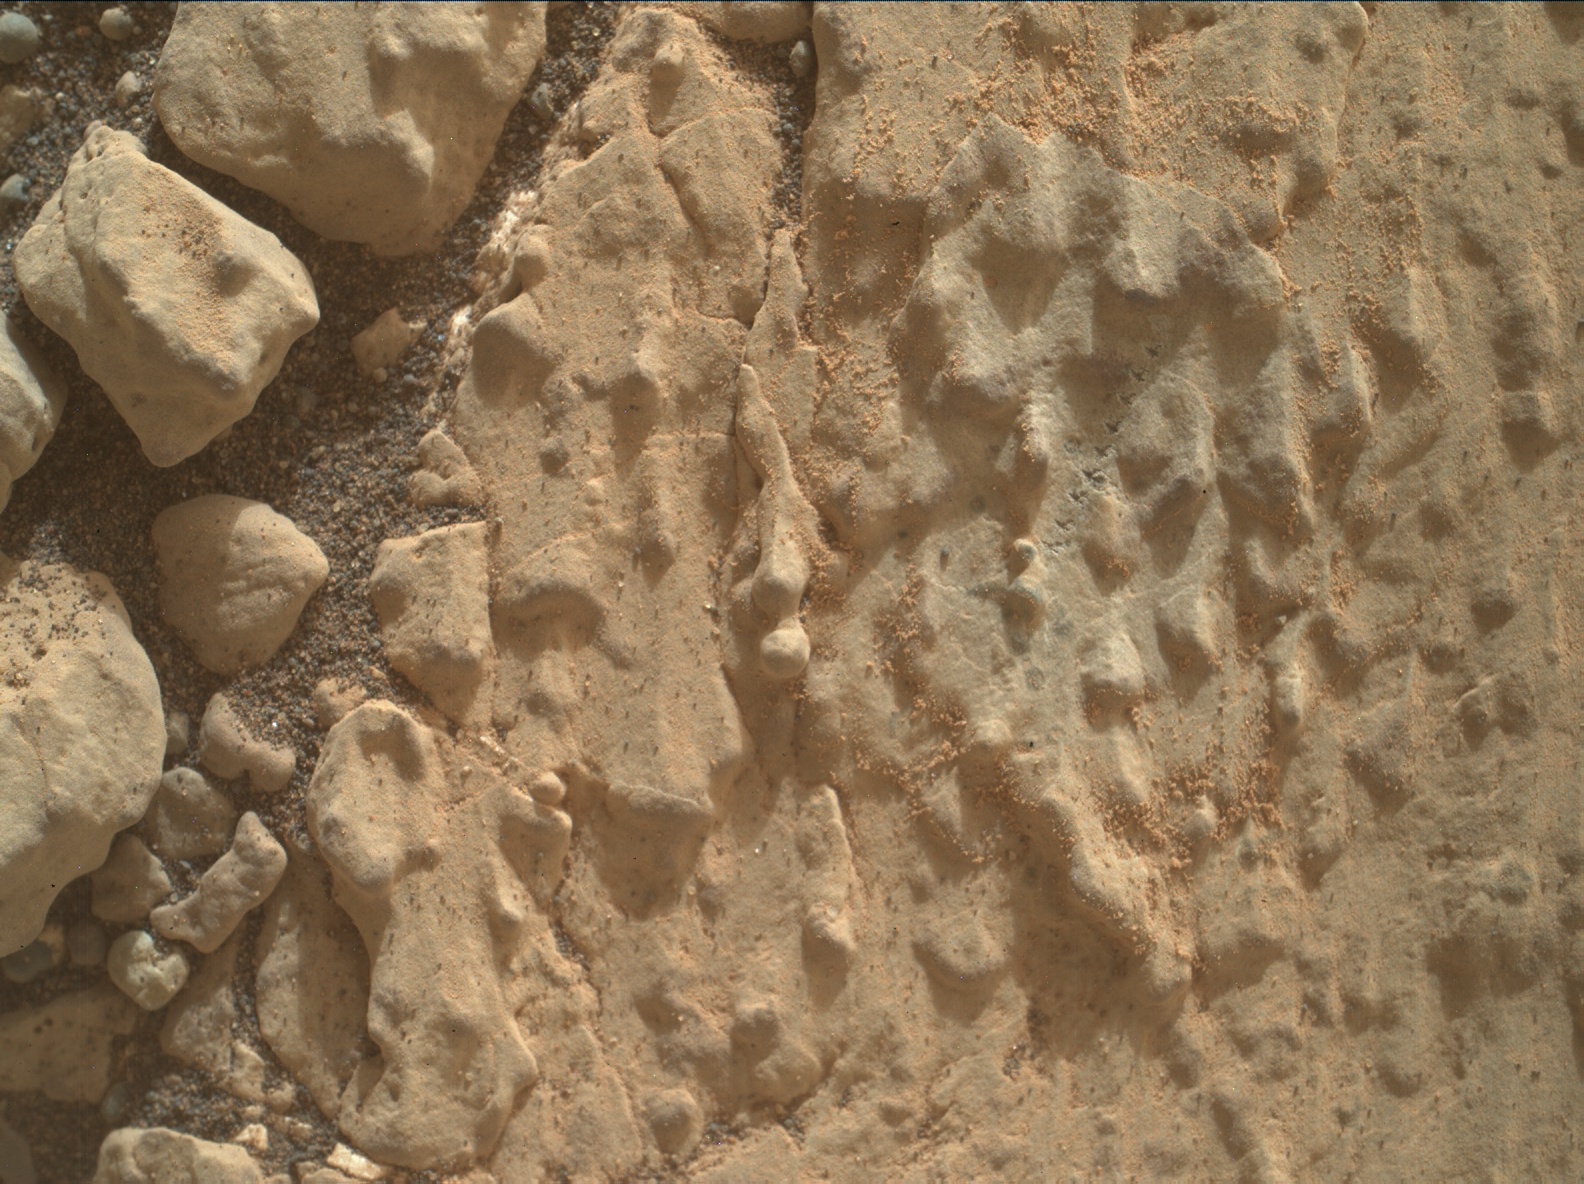 Nasa's Mars rover Curiosity acquired this image using its Mars Hand Lens Imager (MAHLI) on Sol 2778